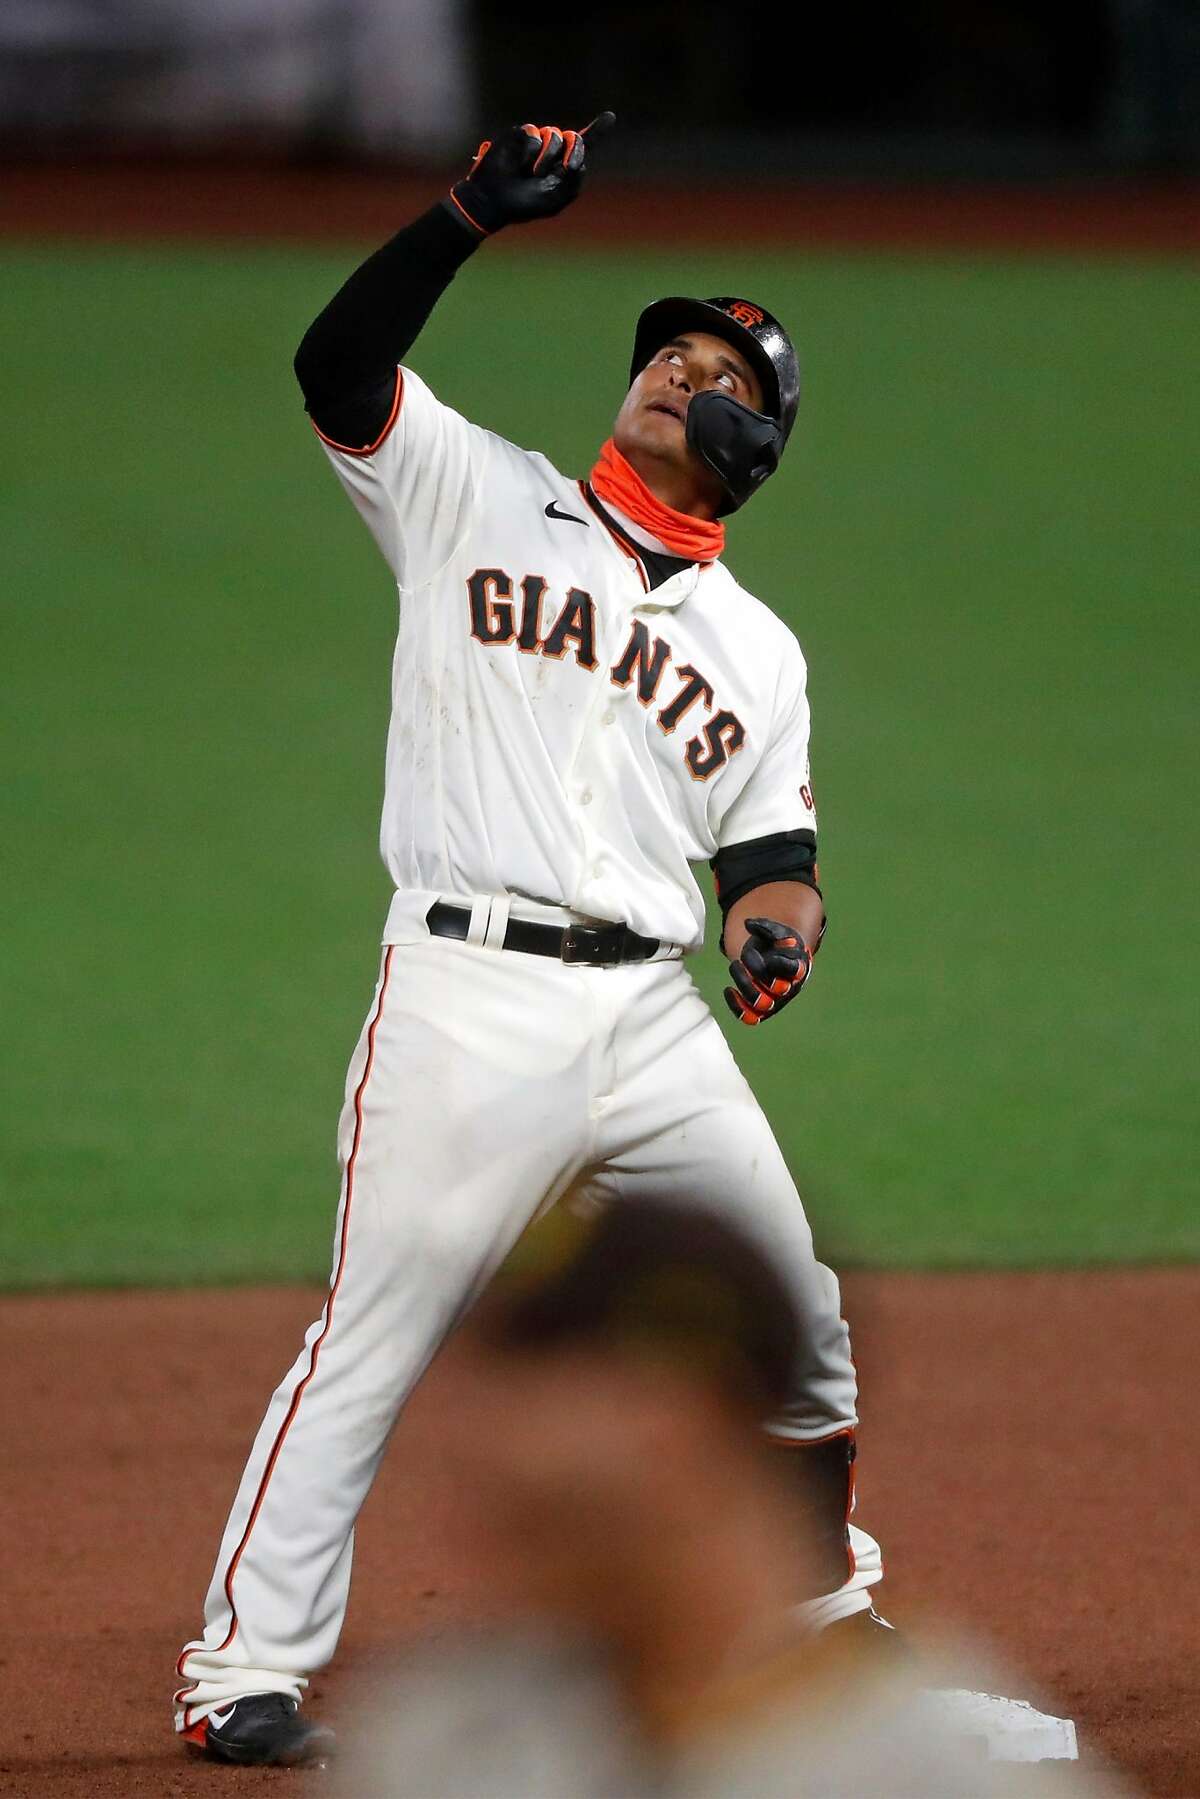 San Francisco Giants' Donovan Solano reacts to his RBI double in 7th inning against San Diego Padres during MLB game at Oracle Park in San Francisco, Calif., on Thursday, July 30, 2020.